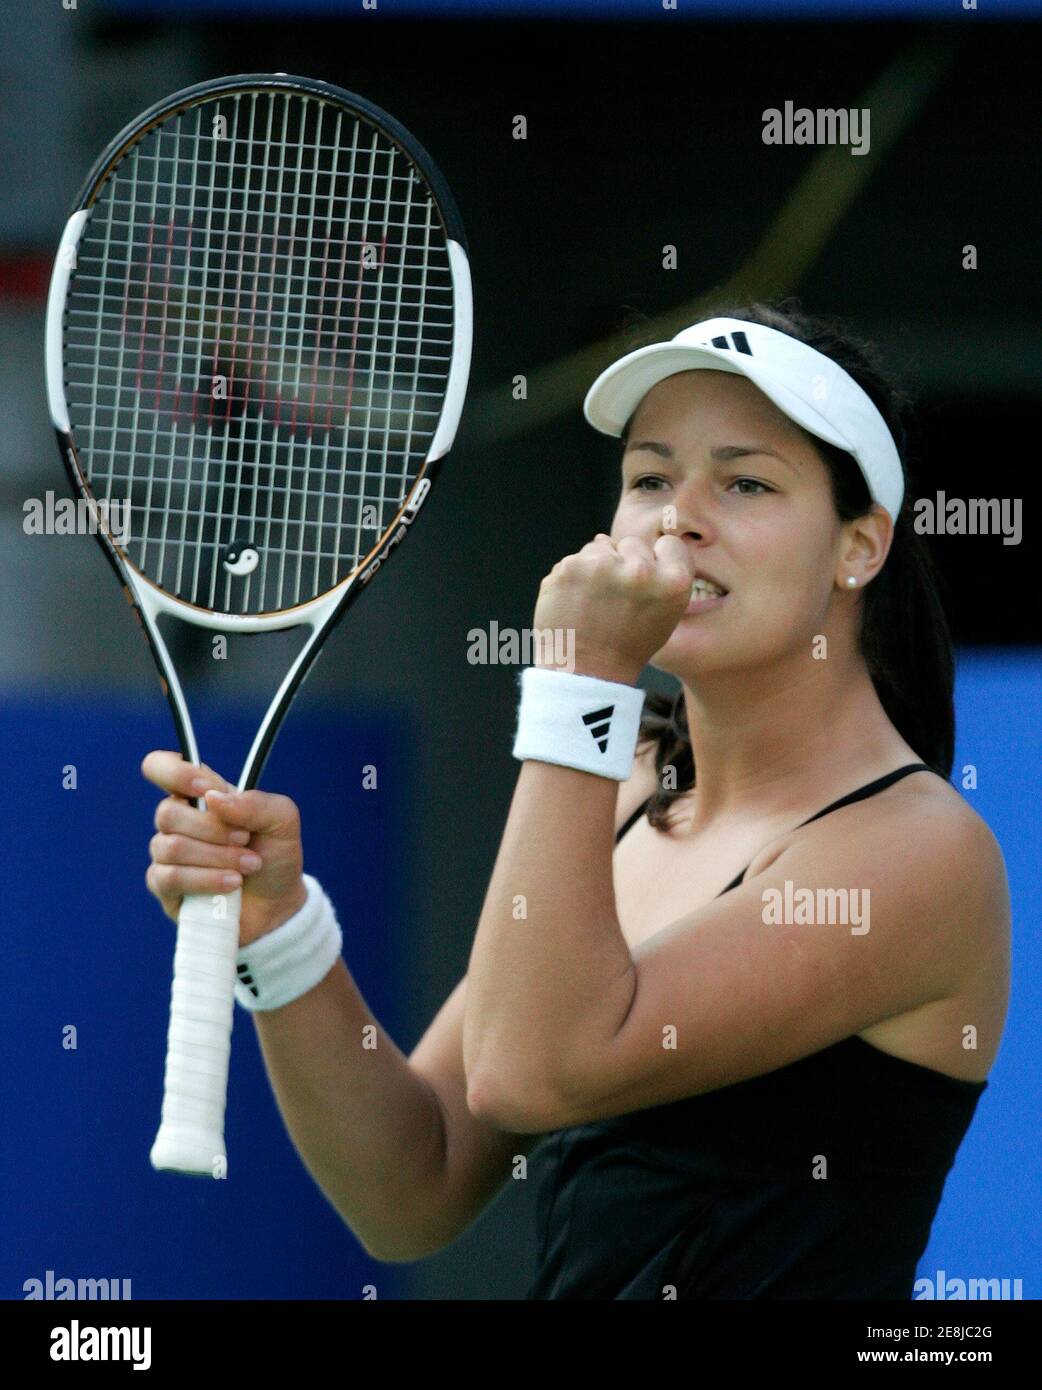 Ana Ivanovic of Serbia reacts after winning a point during her match against Nadia Petrova of Russia who retired hurt at the Sydney International tennis tournament at Olympic Park in Sydney January 9, 2007. REUTERS/Will Burgess (AUSTRALIA) Stock Photo